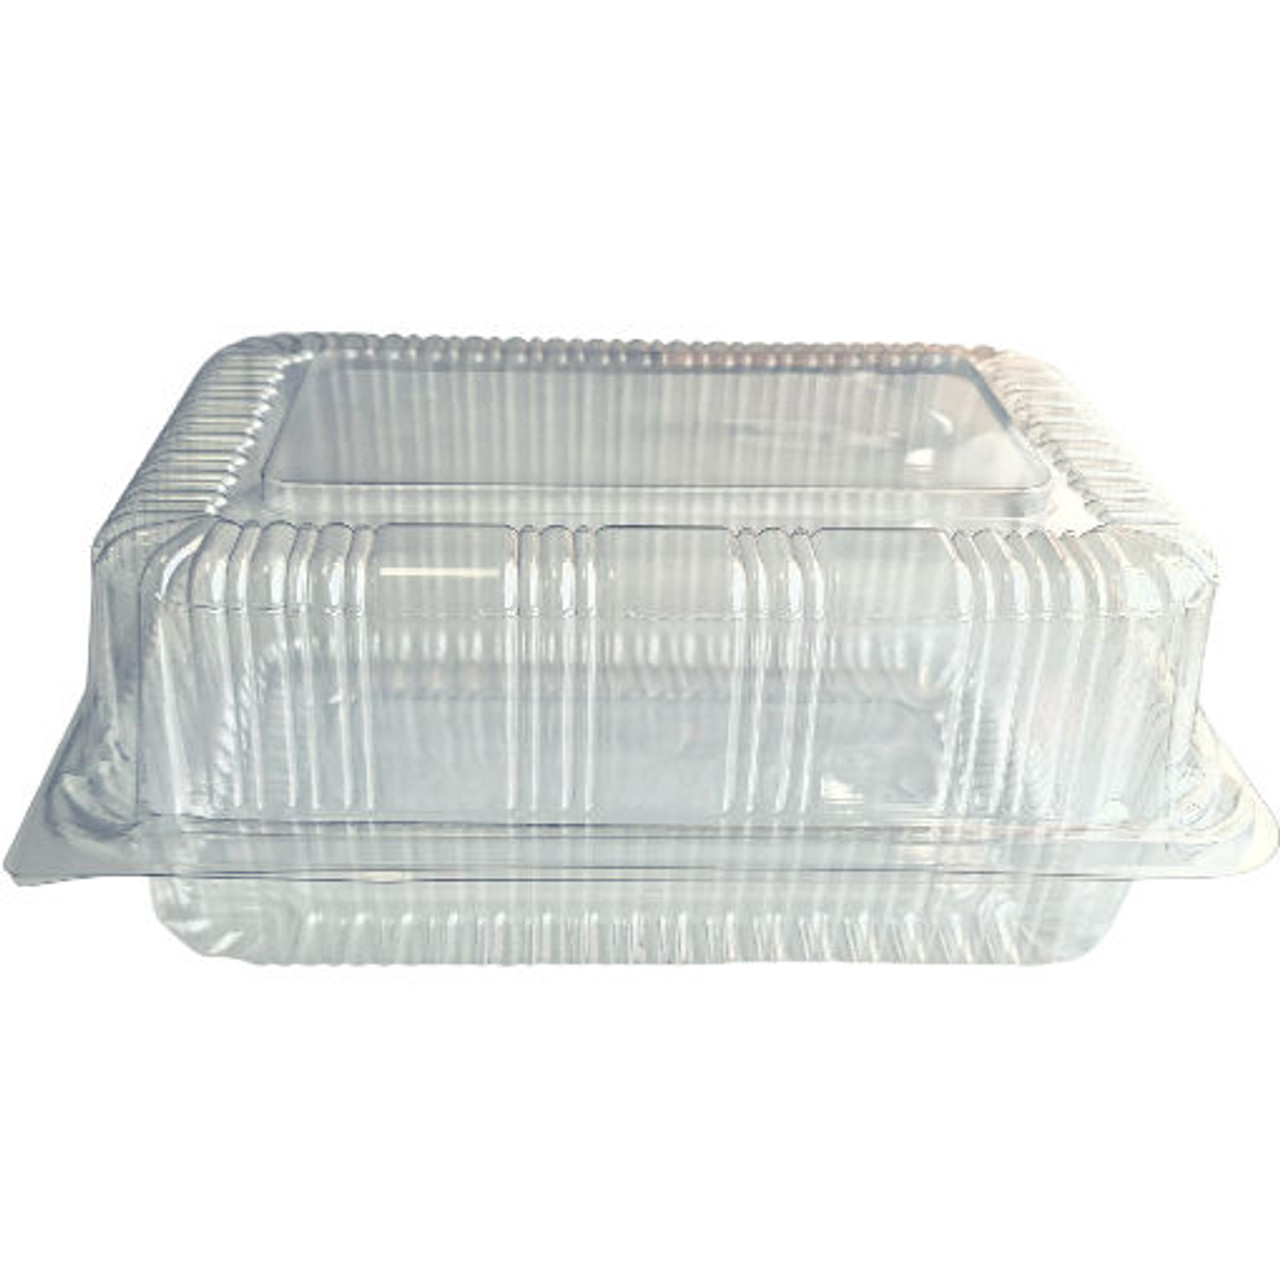 Pack 90 - Quality Extra Large Crystal Clear Hinged Bakery Containers 265 x 175 x 110mm